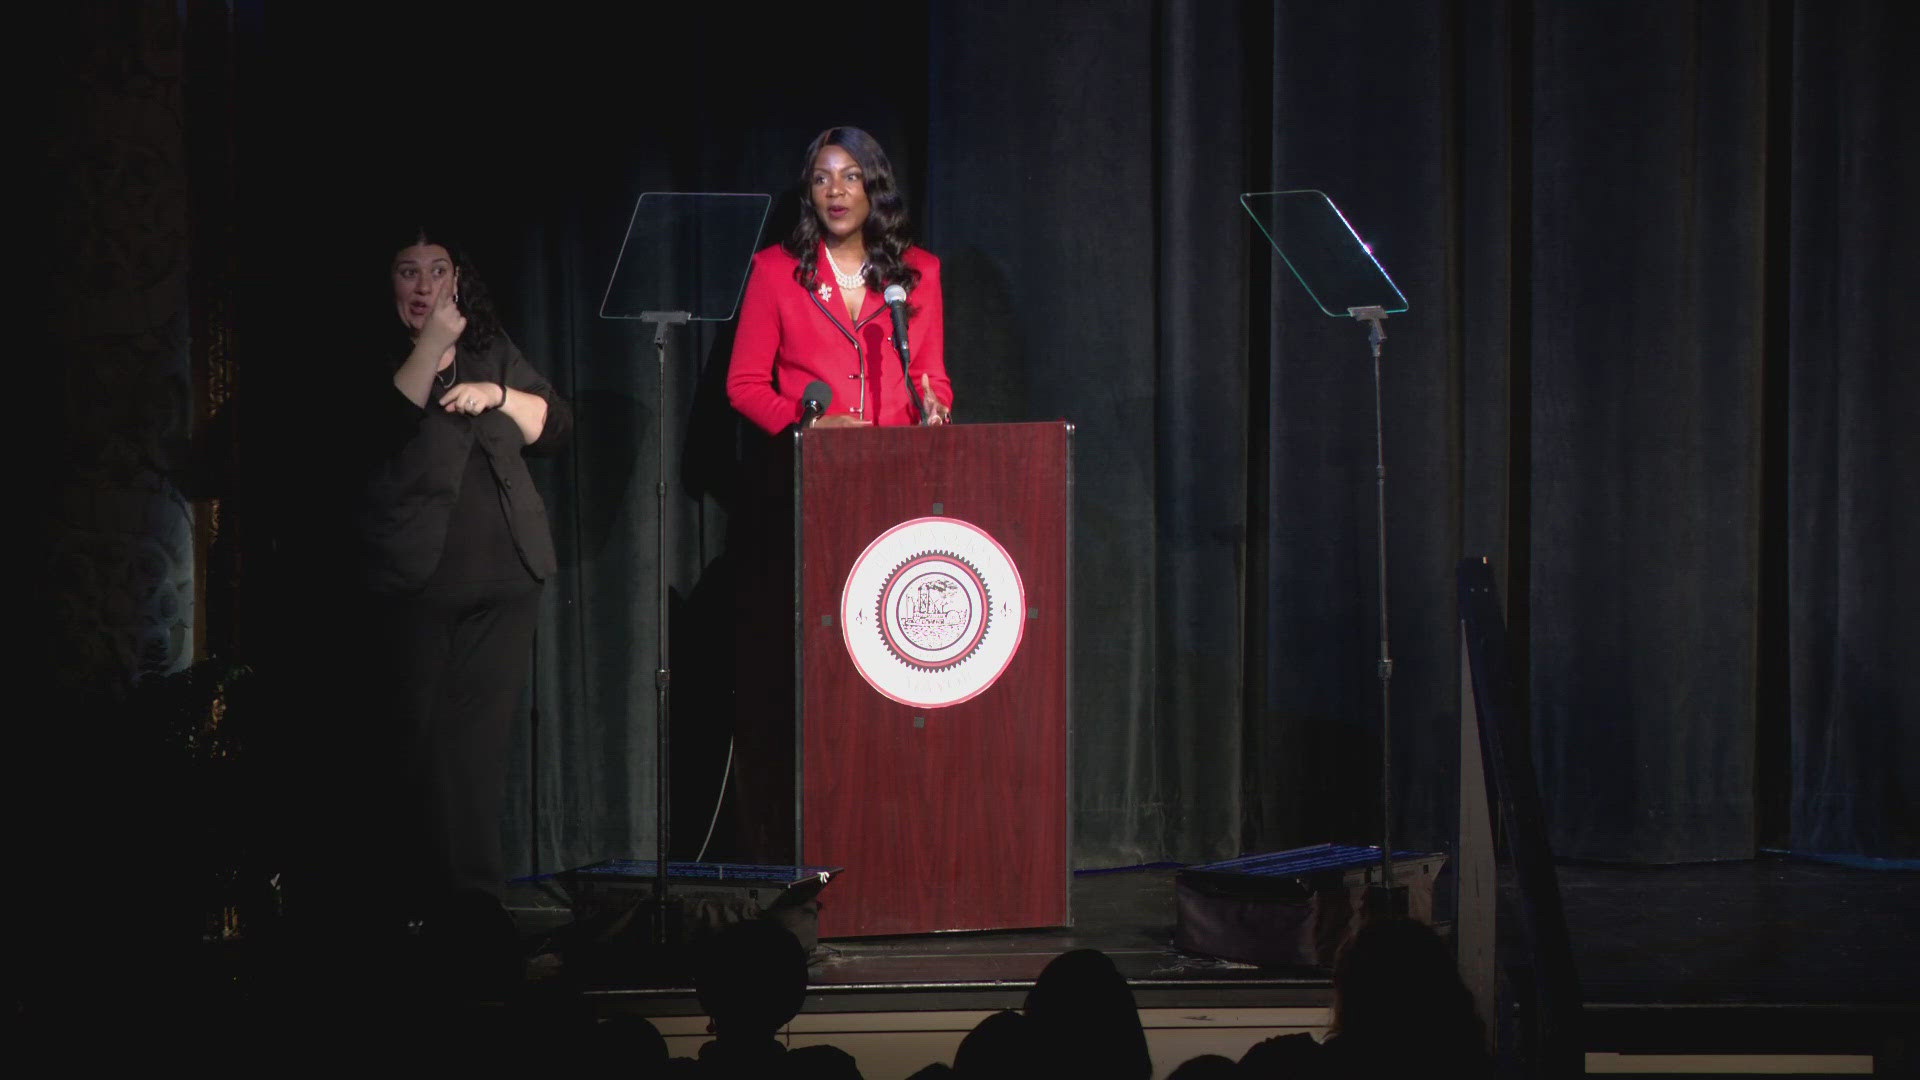 Mayor Tishaura Jones struck a noticeable different tone than in her last State of the City address.